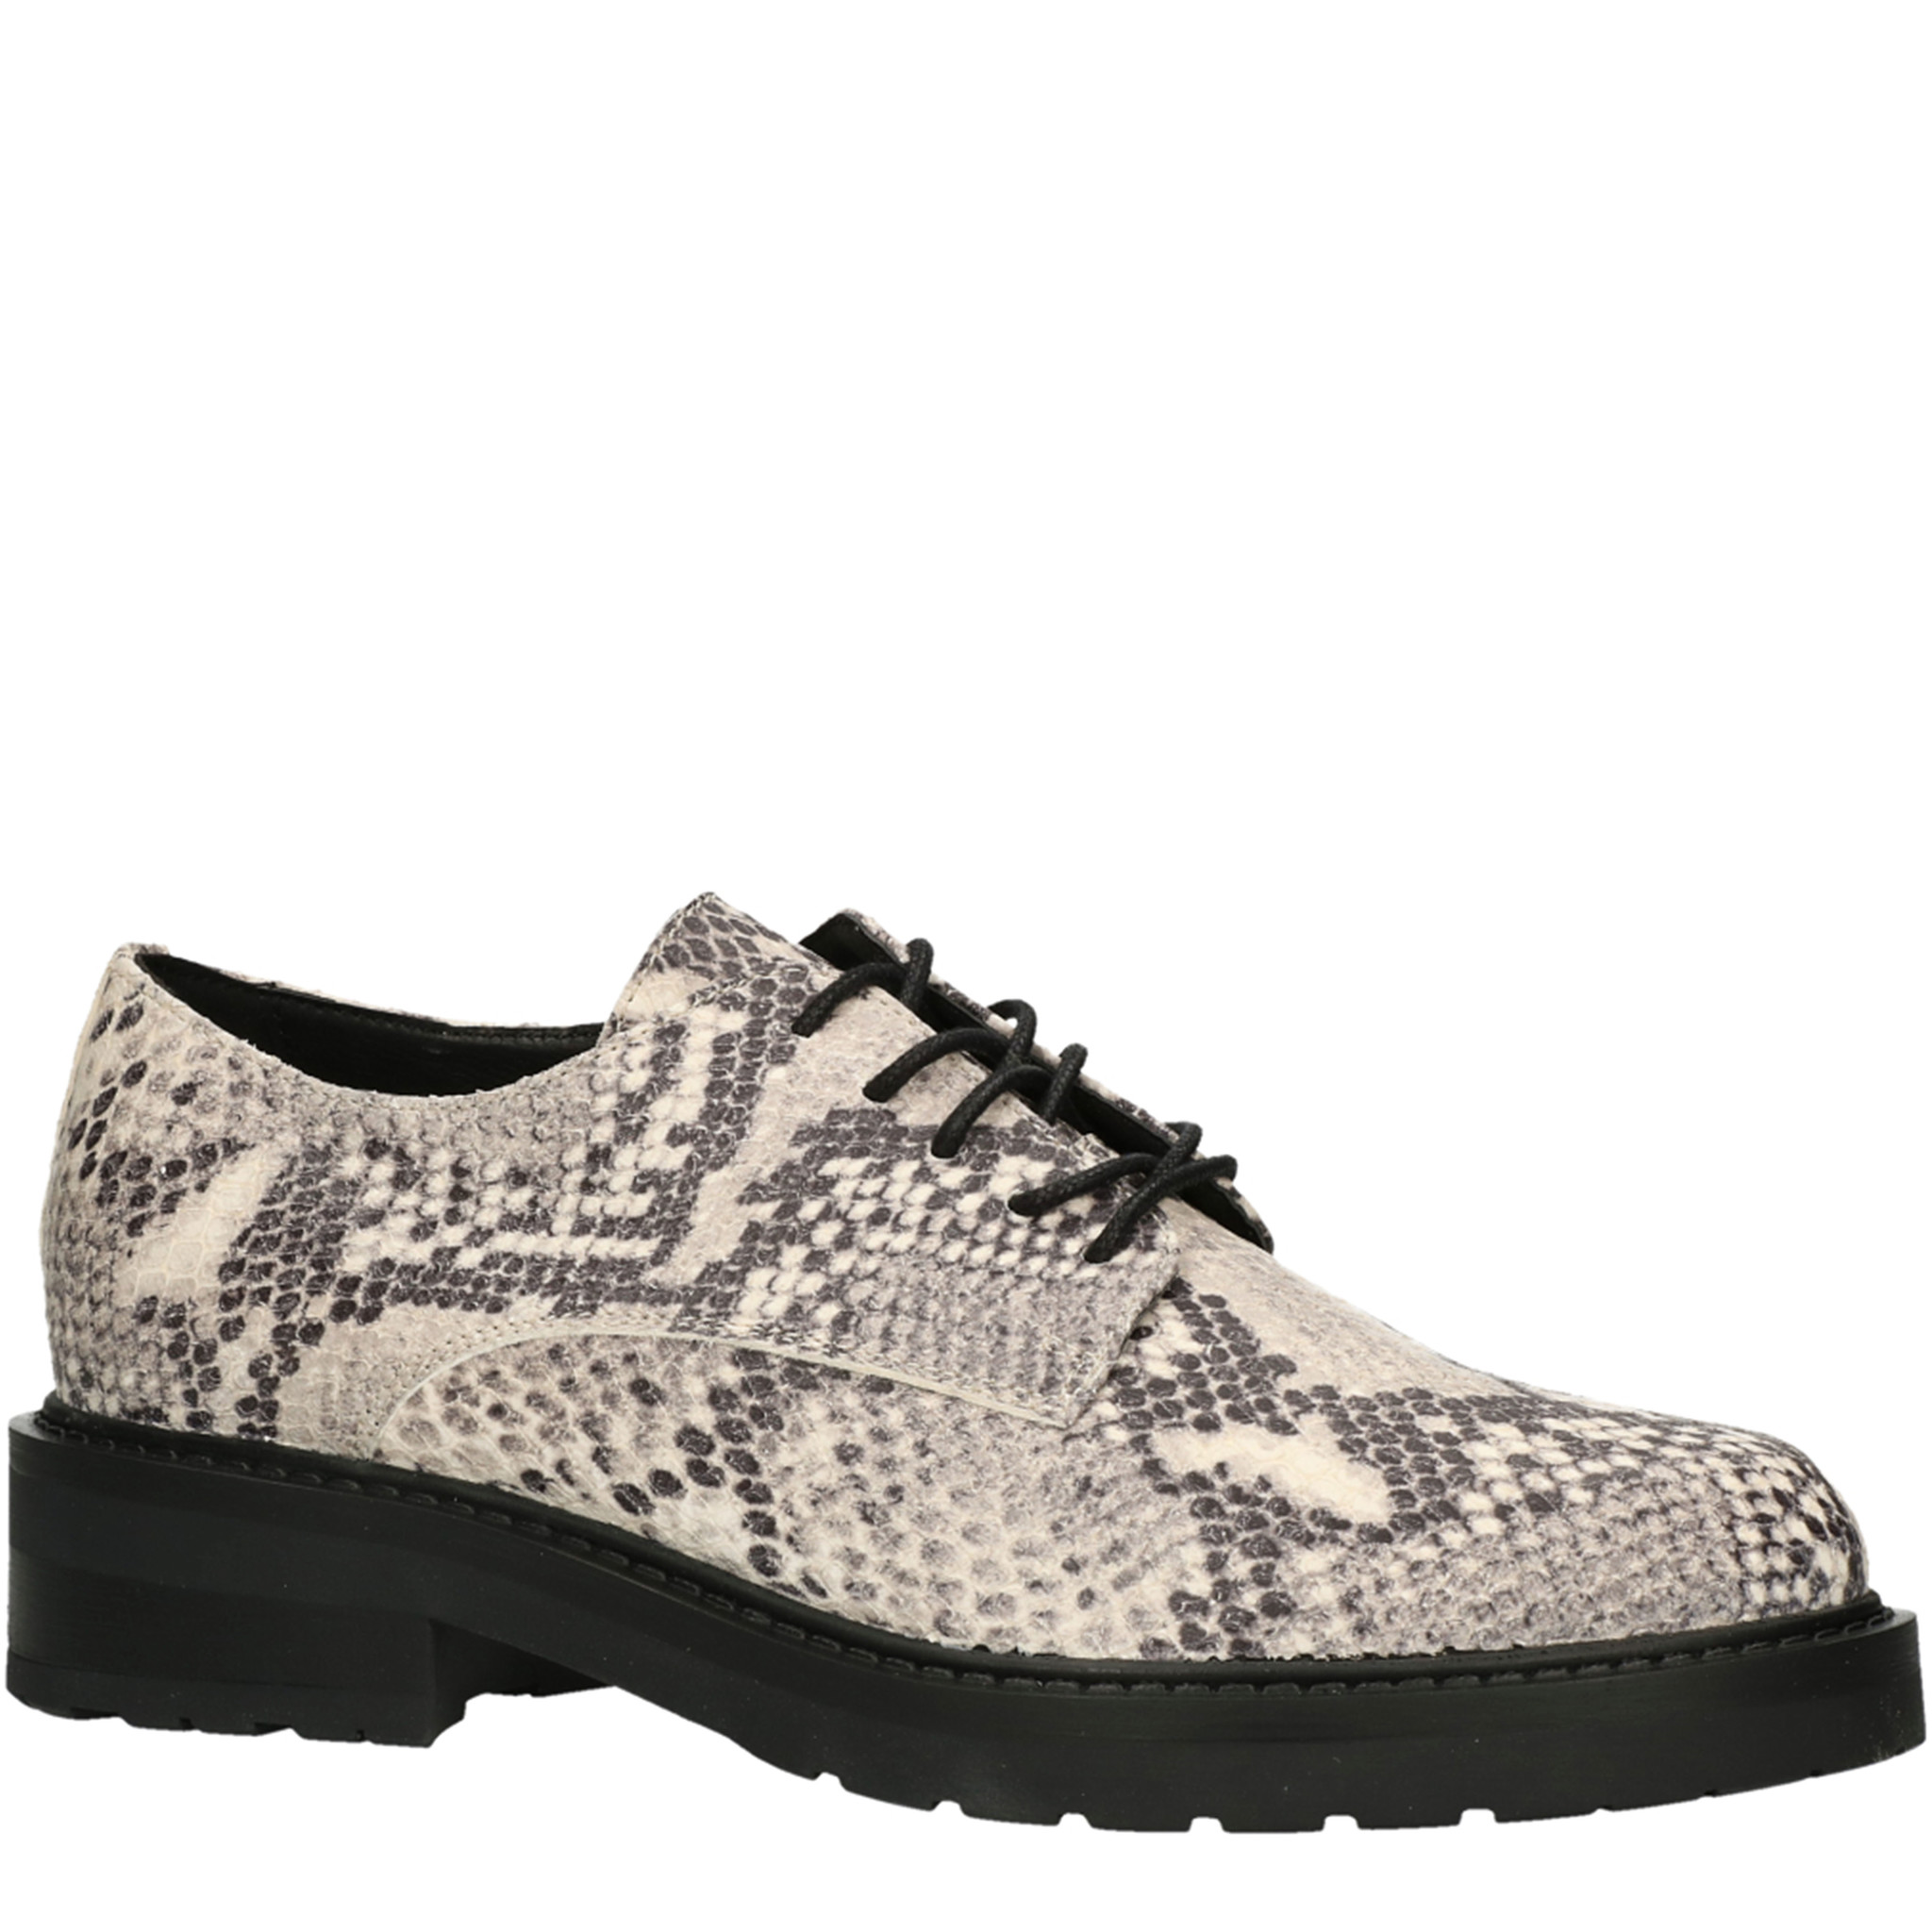 Bullboxer Lace up Shoes Snake Print 